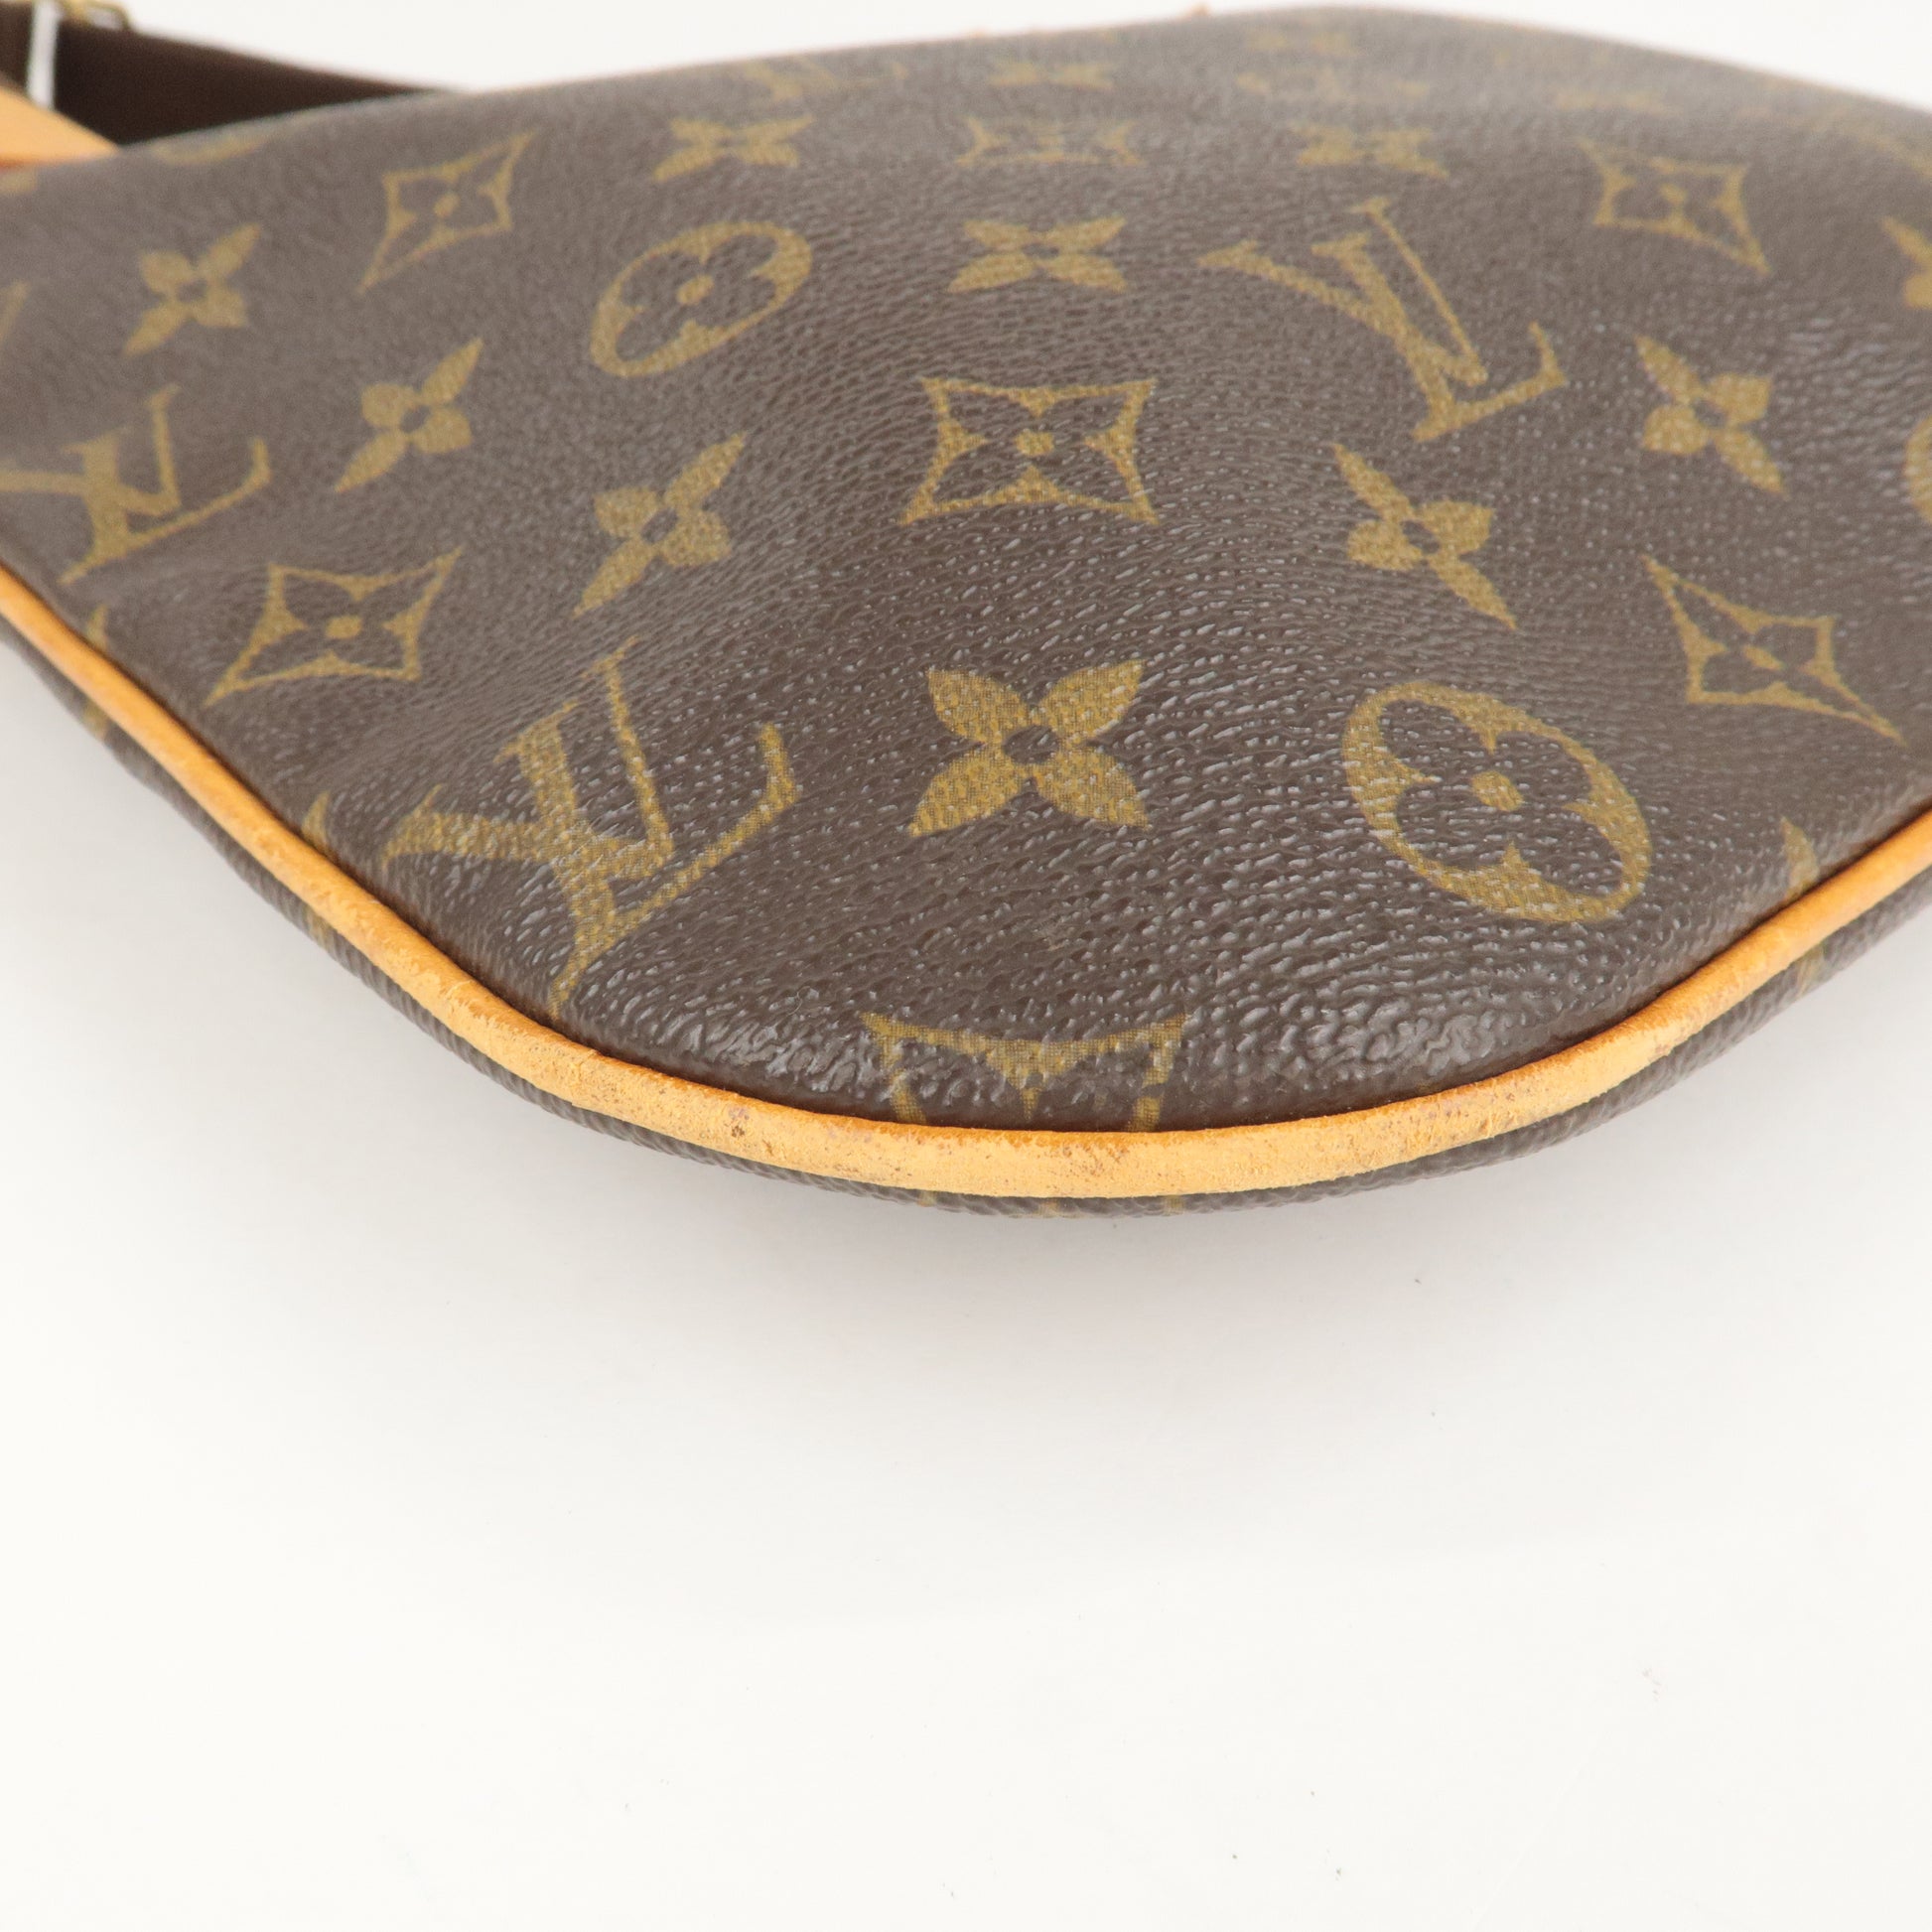 The new S Lock Sling Bag was selling out sooo fast, glad I was able to get  my hands on one! : r/Louisvuitton